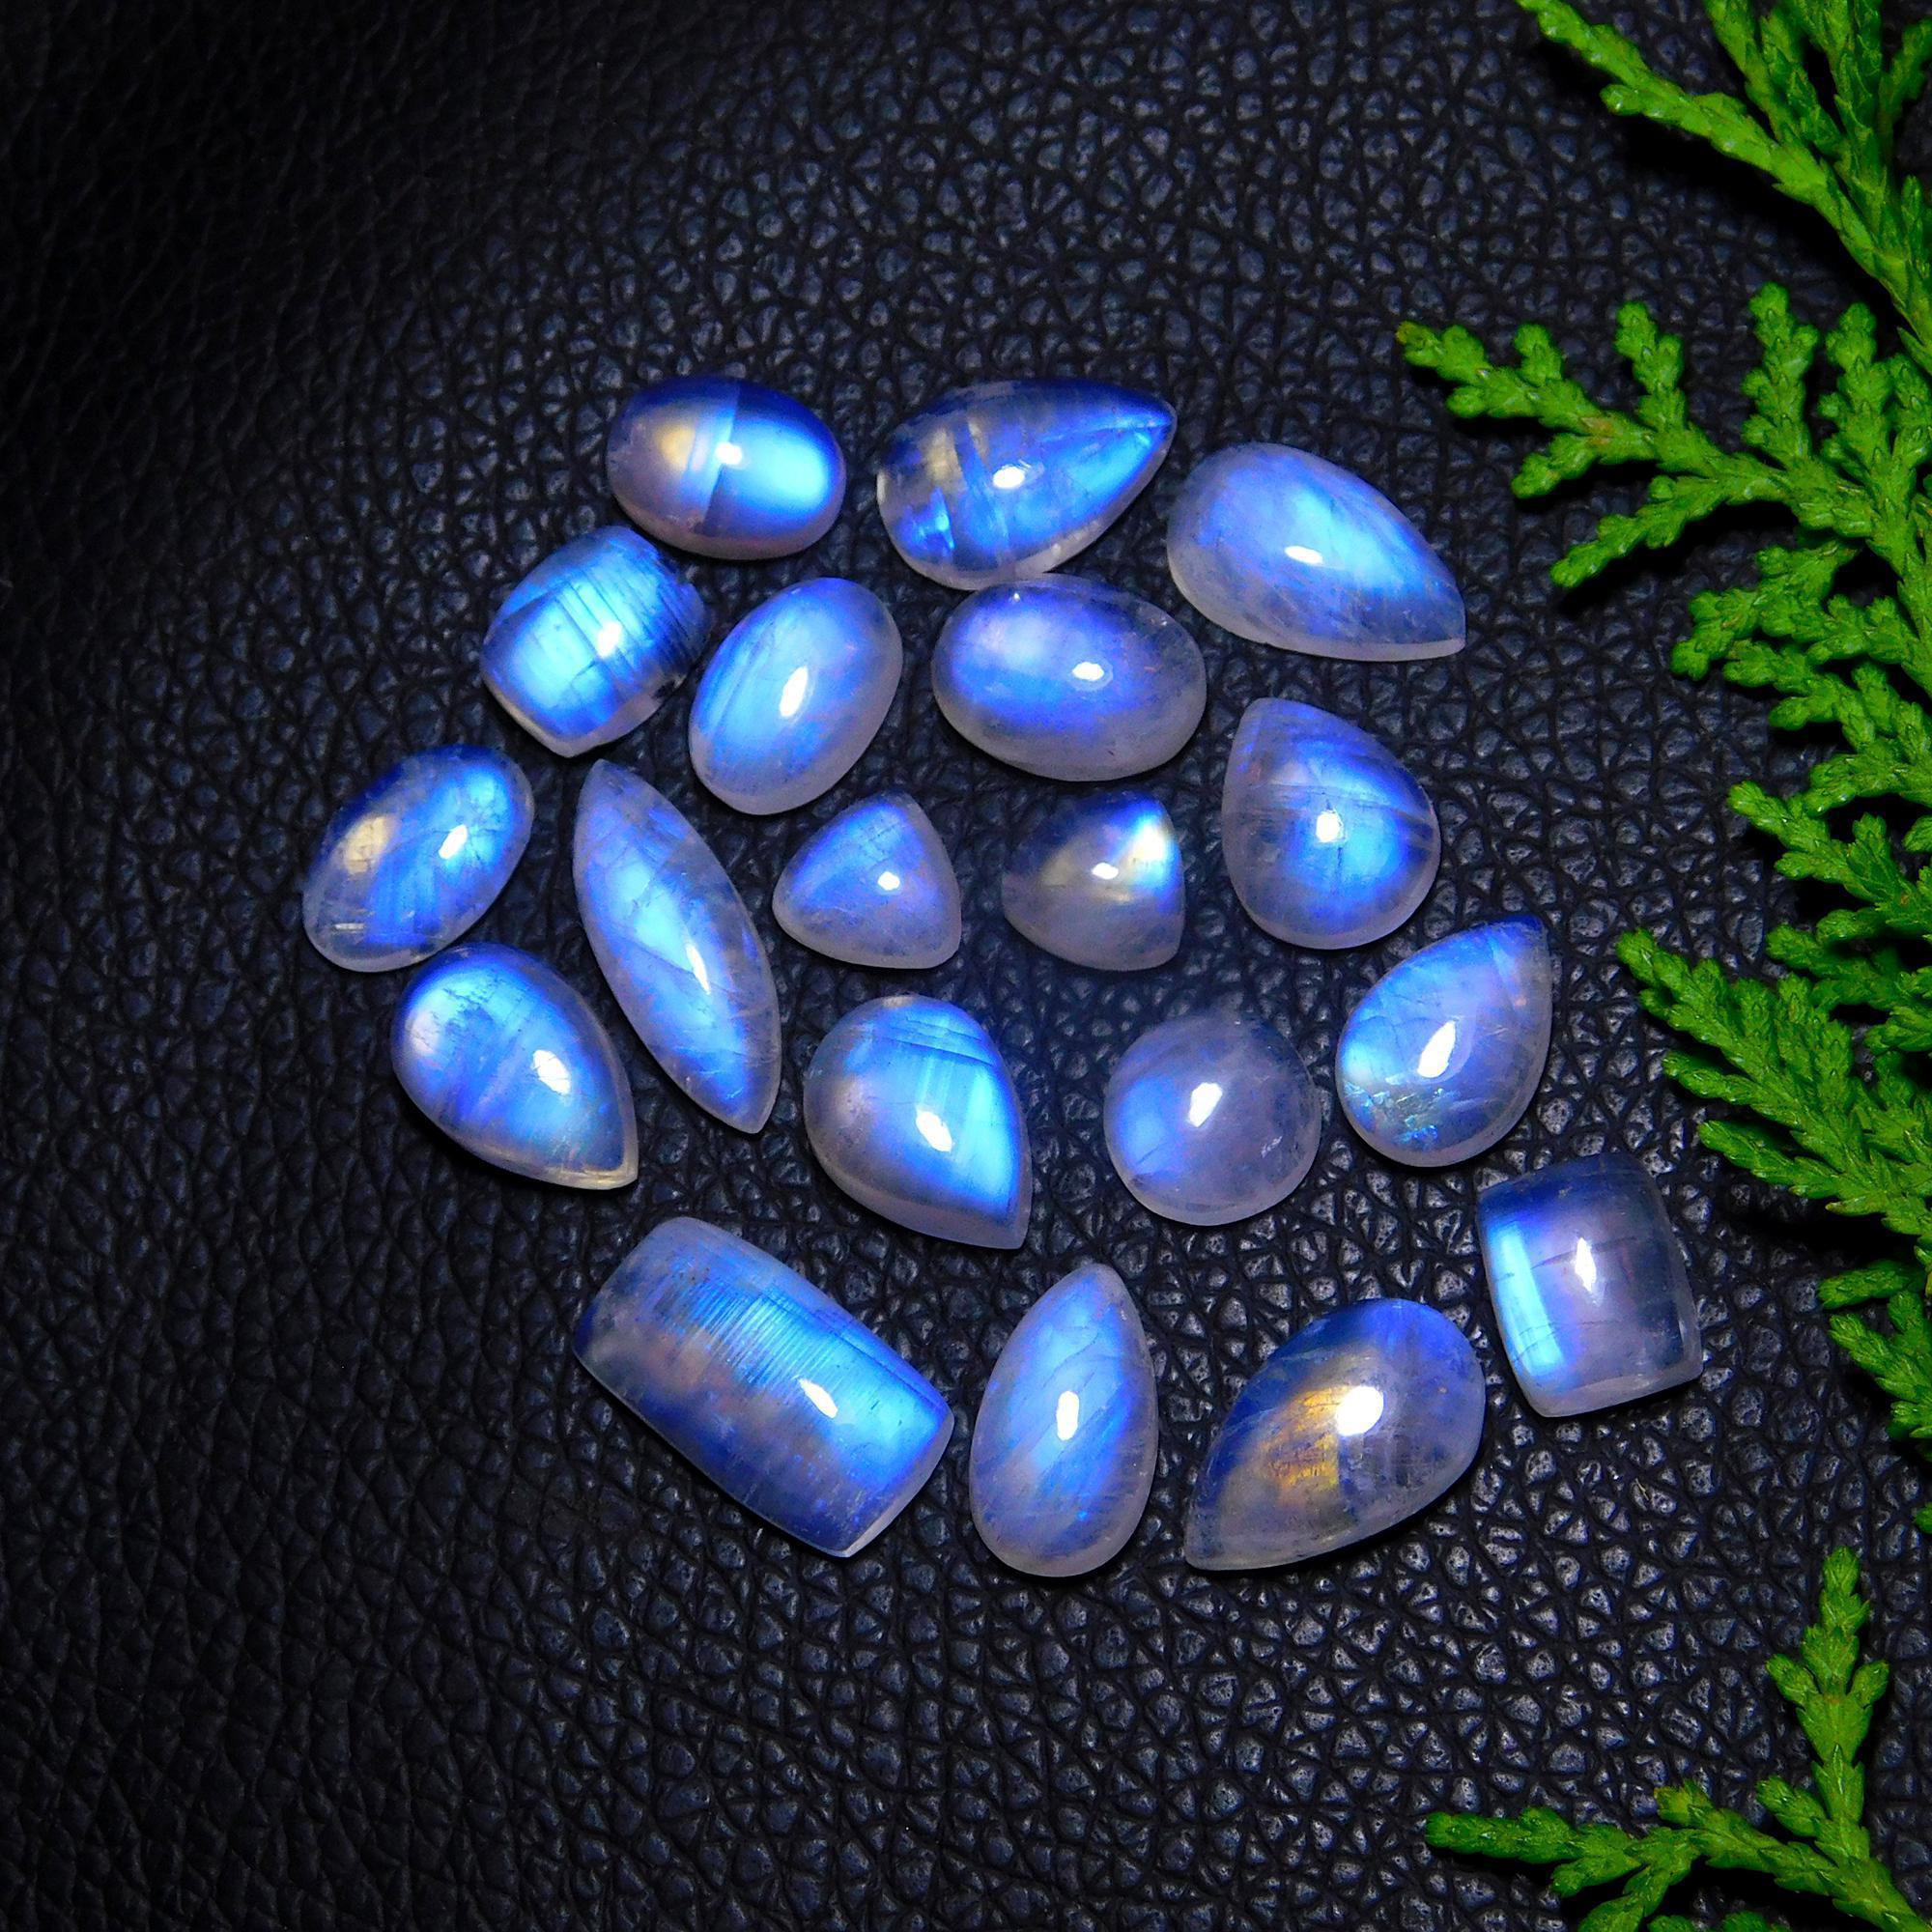 19Pcs 78Cts Natural Rainbow Moonstone Cabochon Blue Fire Loose Gemstone Crystal jewelry supplies wholesale lot gift for her Black Friday 16x9 9x9mm#9437